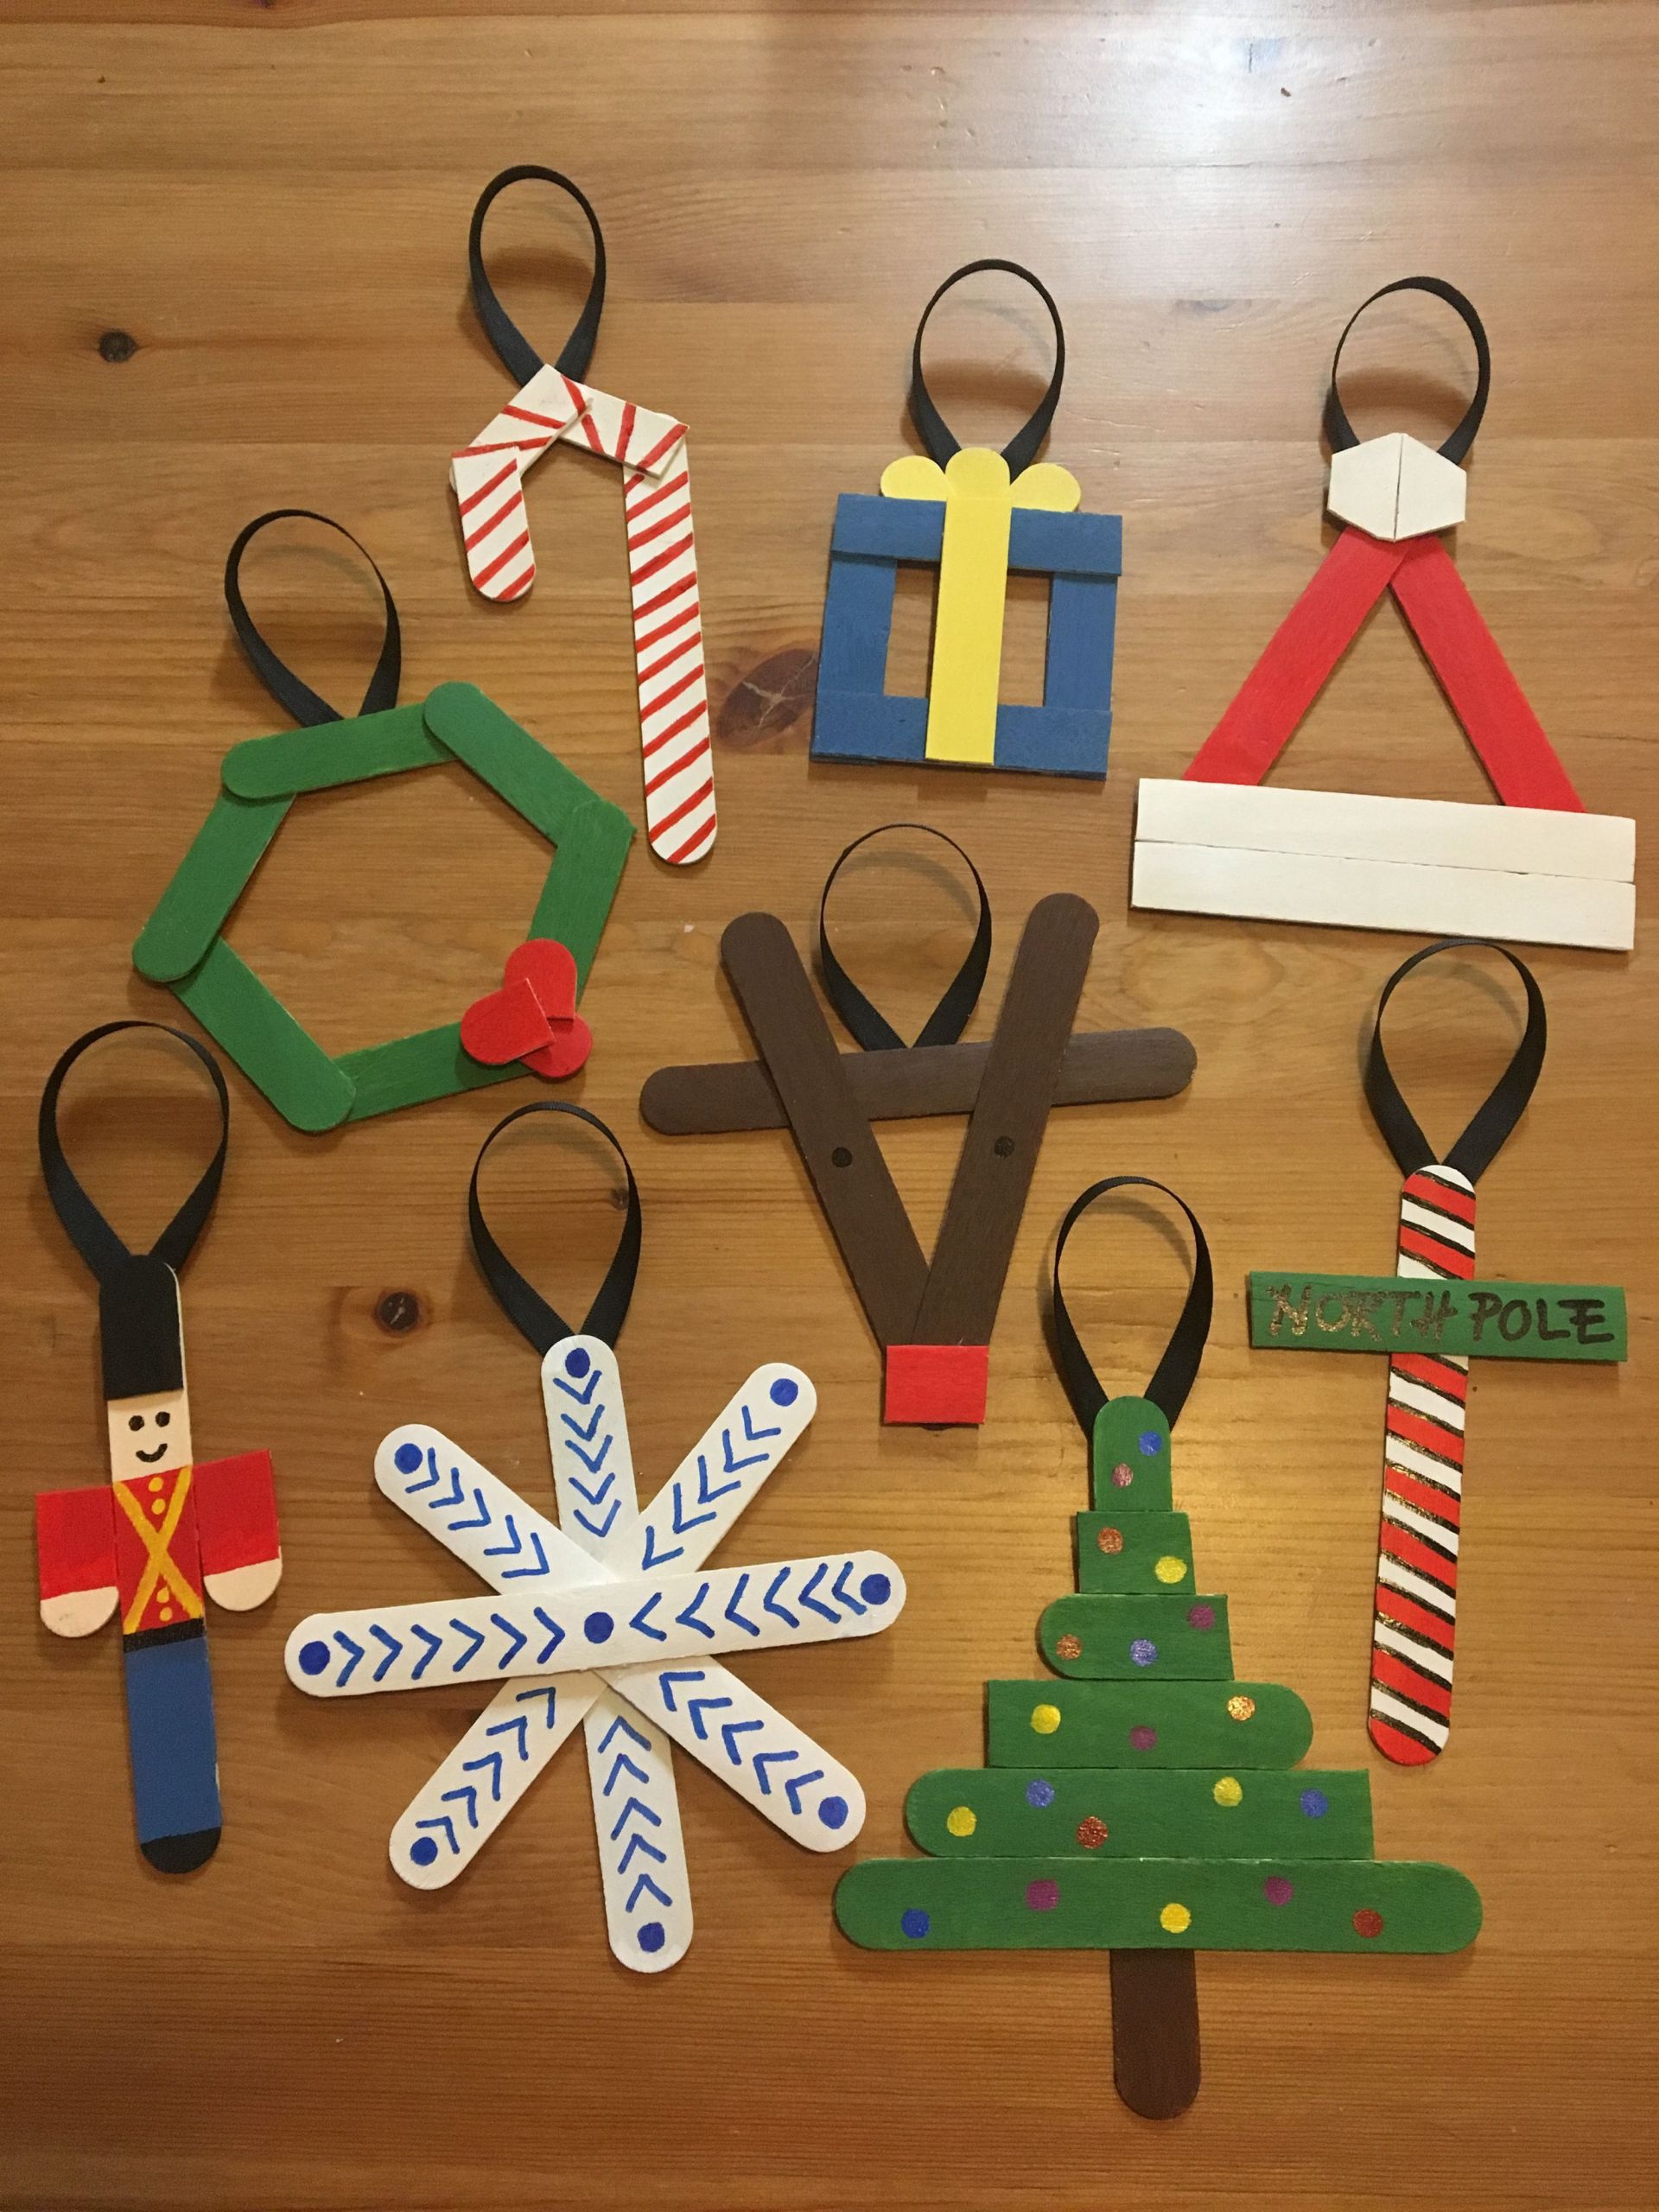 DIY Christmas Ornaments With Popsicle Sticks
 30 DIY Popsicle Stick Decor Ideas To Increase Your